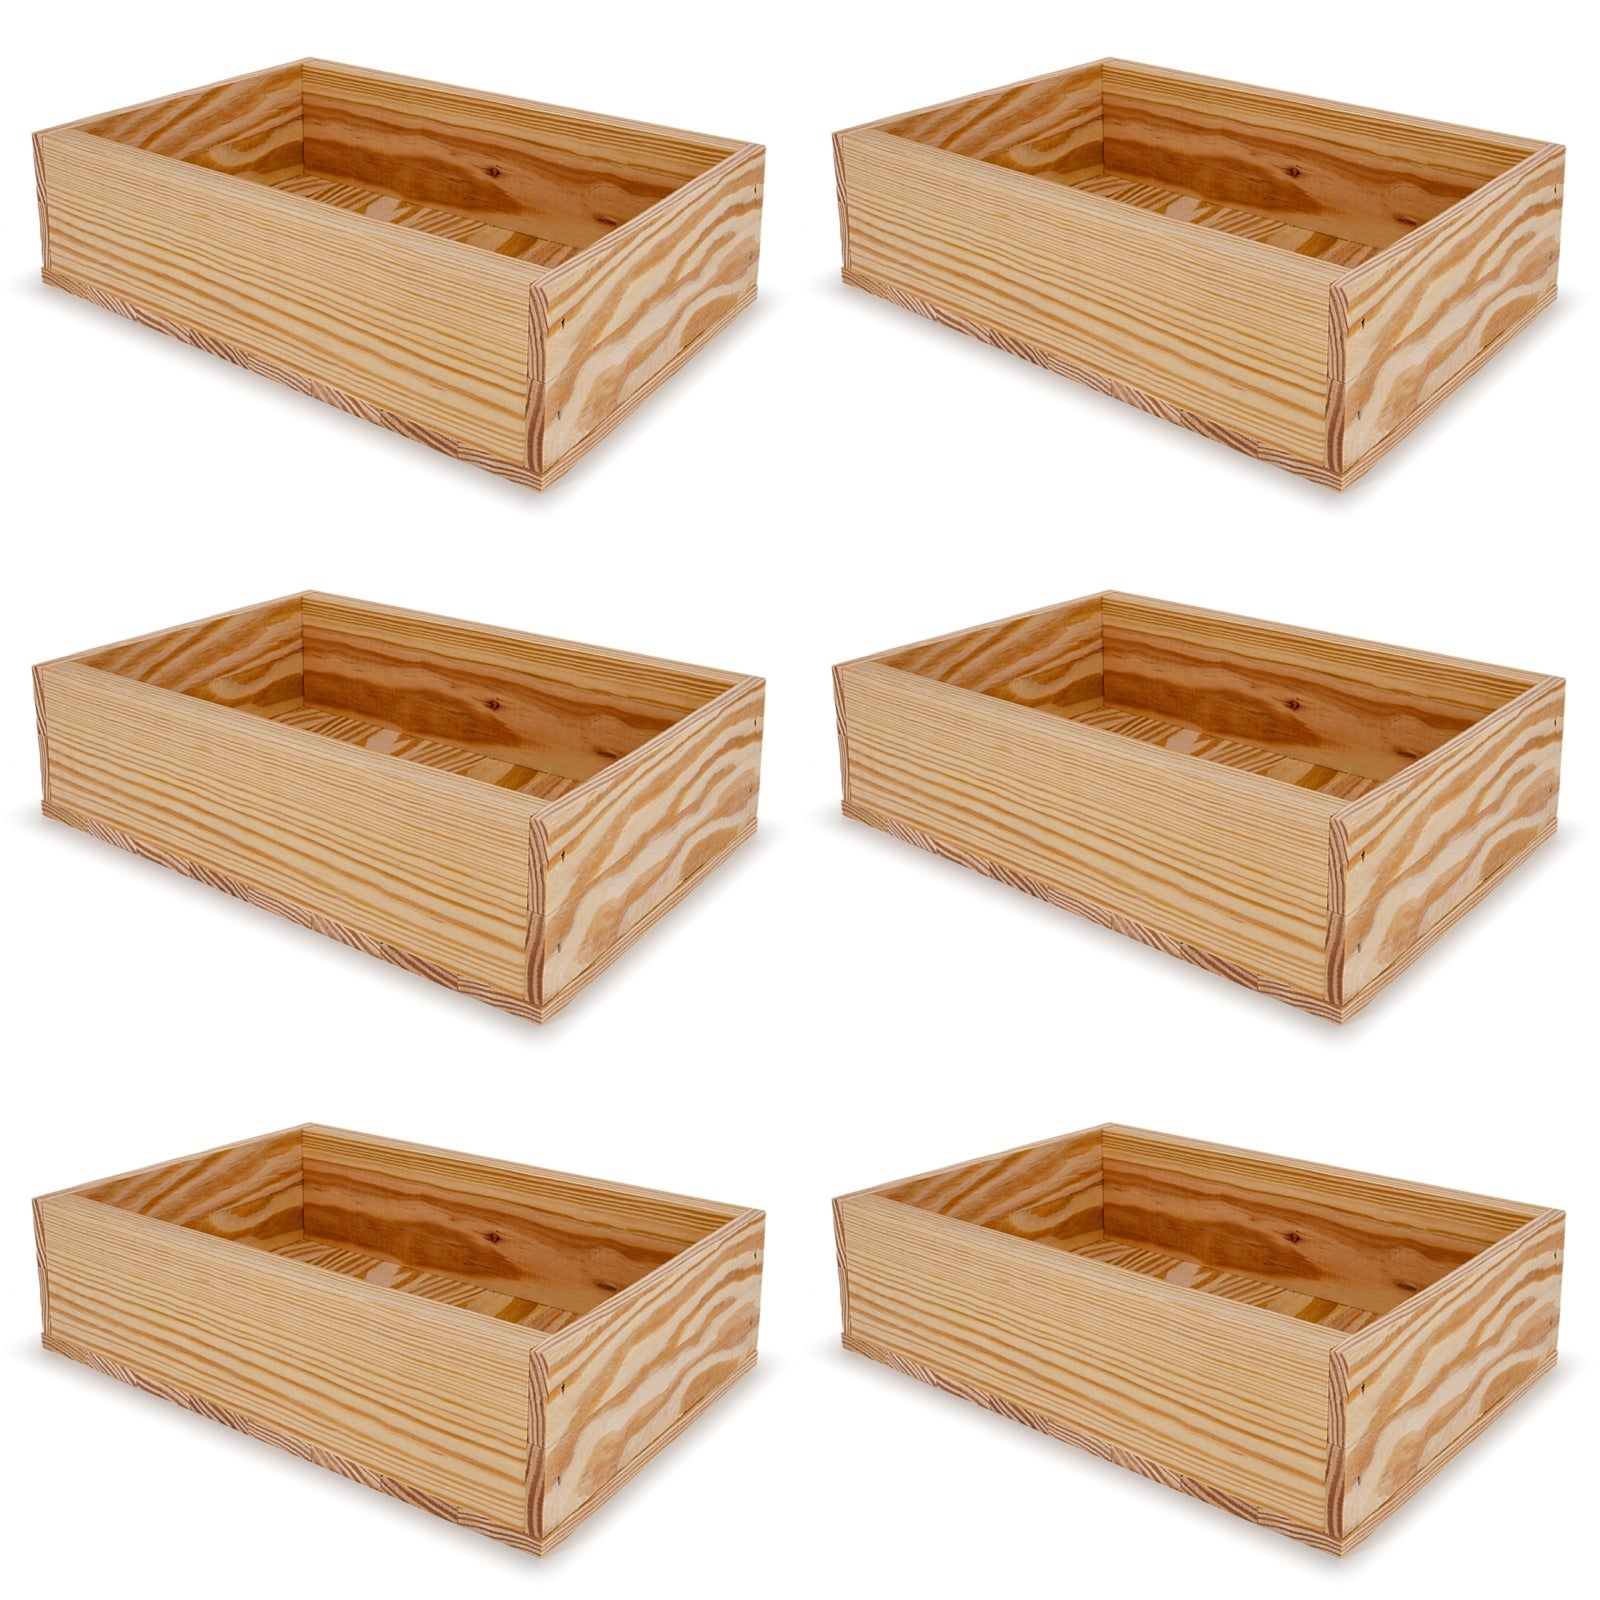 6 Small wooden crates 8x13.25x3.5